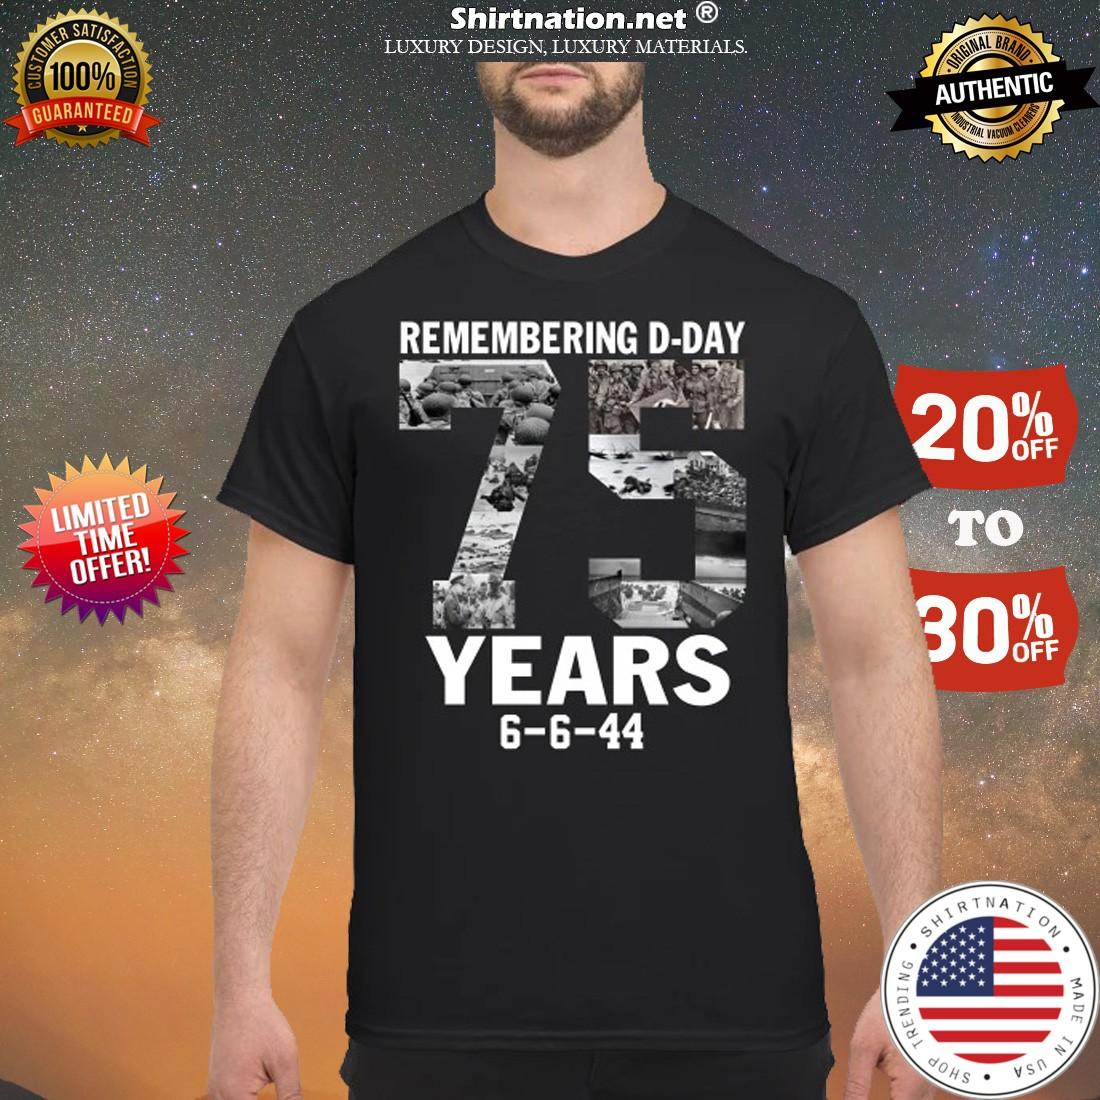 Remember d day 75 years shirt